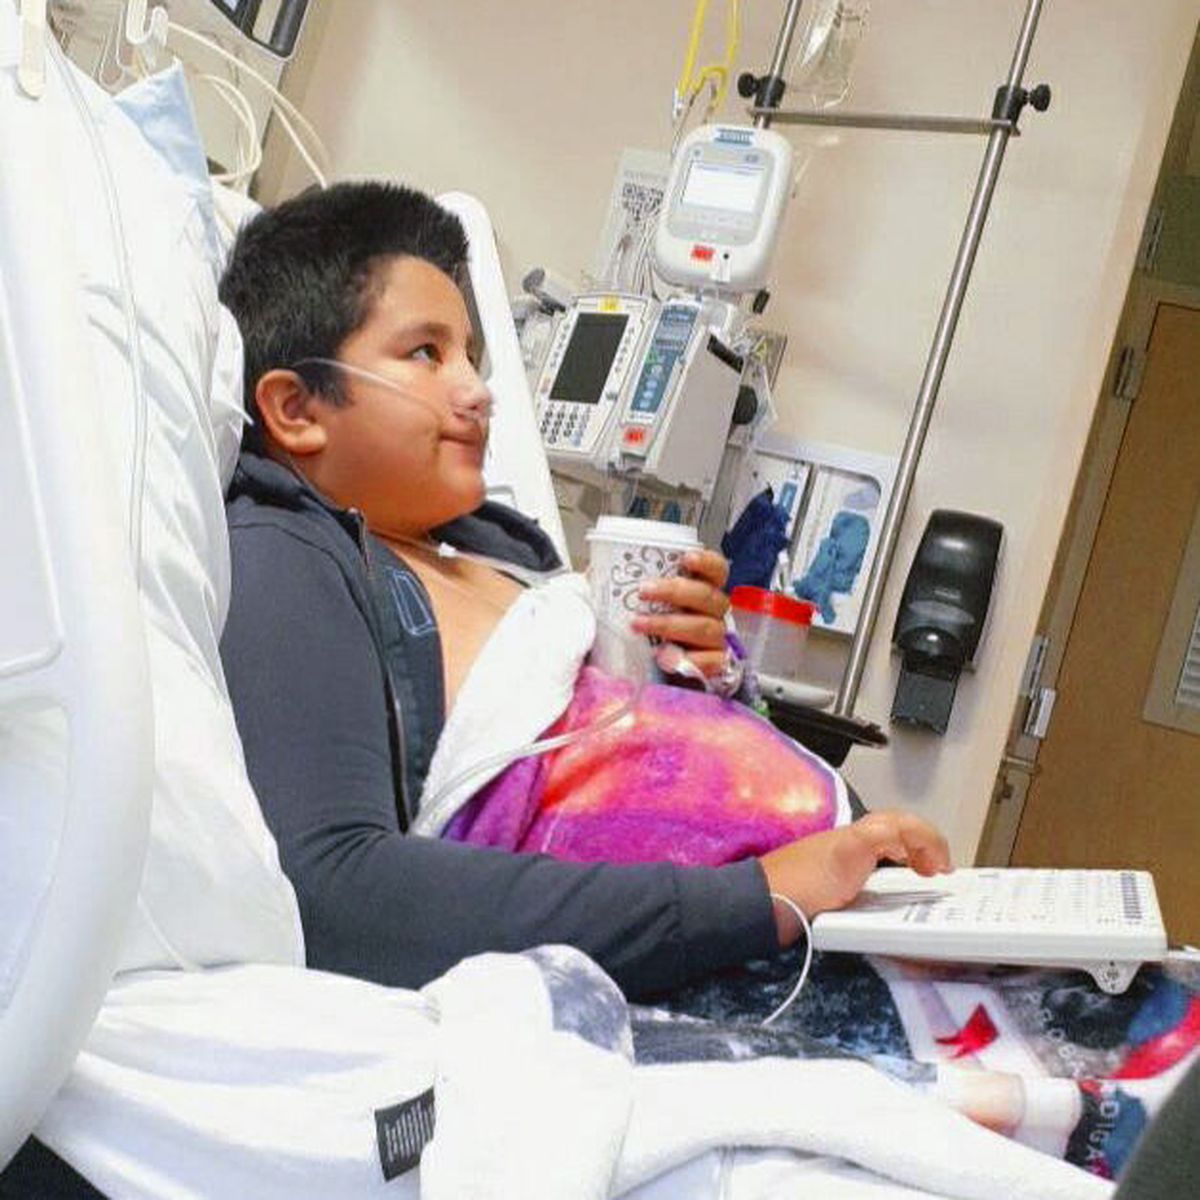 This 2021 photo provided by Yessica Gonzalez shows her son, Francisco Rosales, 9, in the intensive care unit at Children’s Medical Center in Dallas, Texas. The day before he was supposed to start fourth grade, Francisco was admitted to the hospital due to severe COVID-19, struggling to breathe, with dangerously low oxygen levels and an uncertain outcome.  (Yessica Gonzalez)